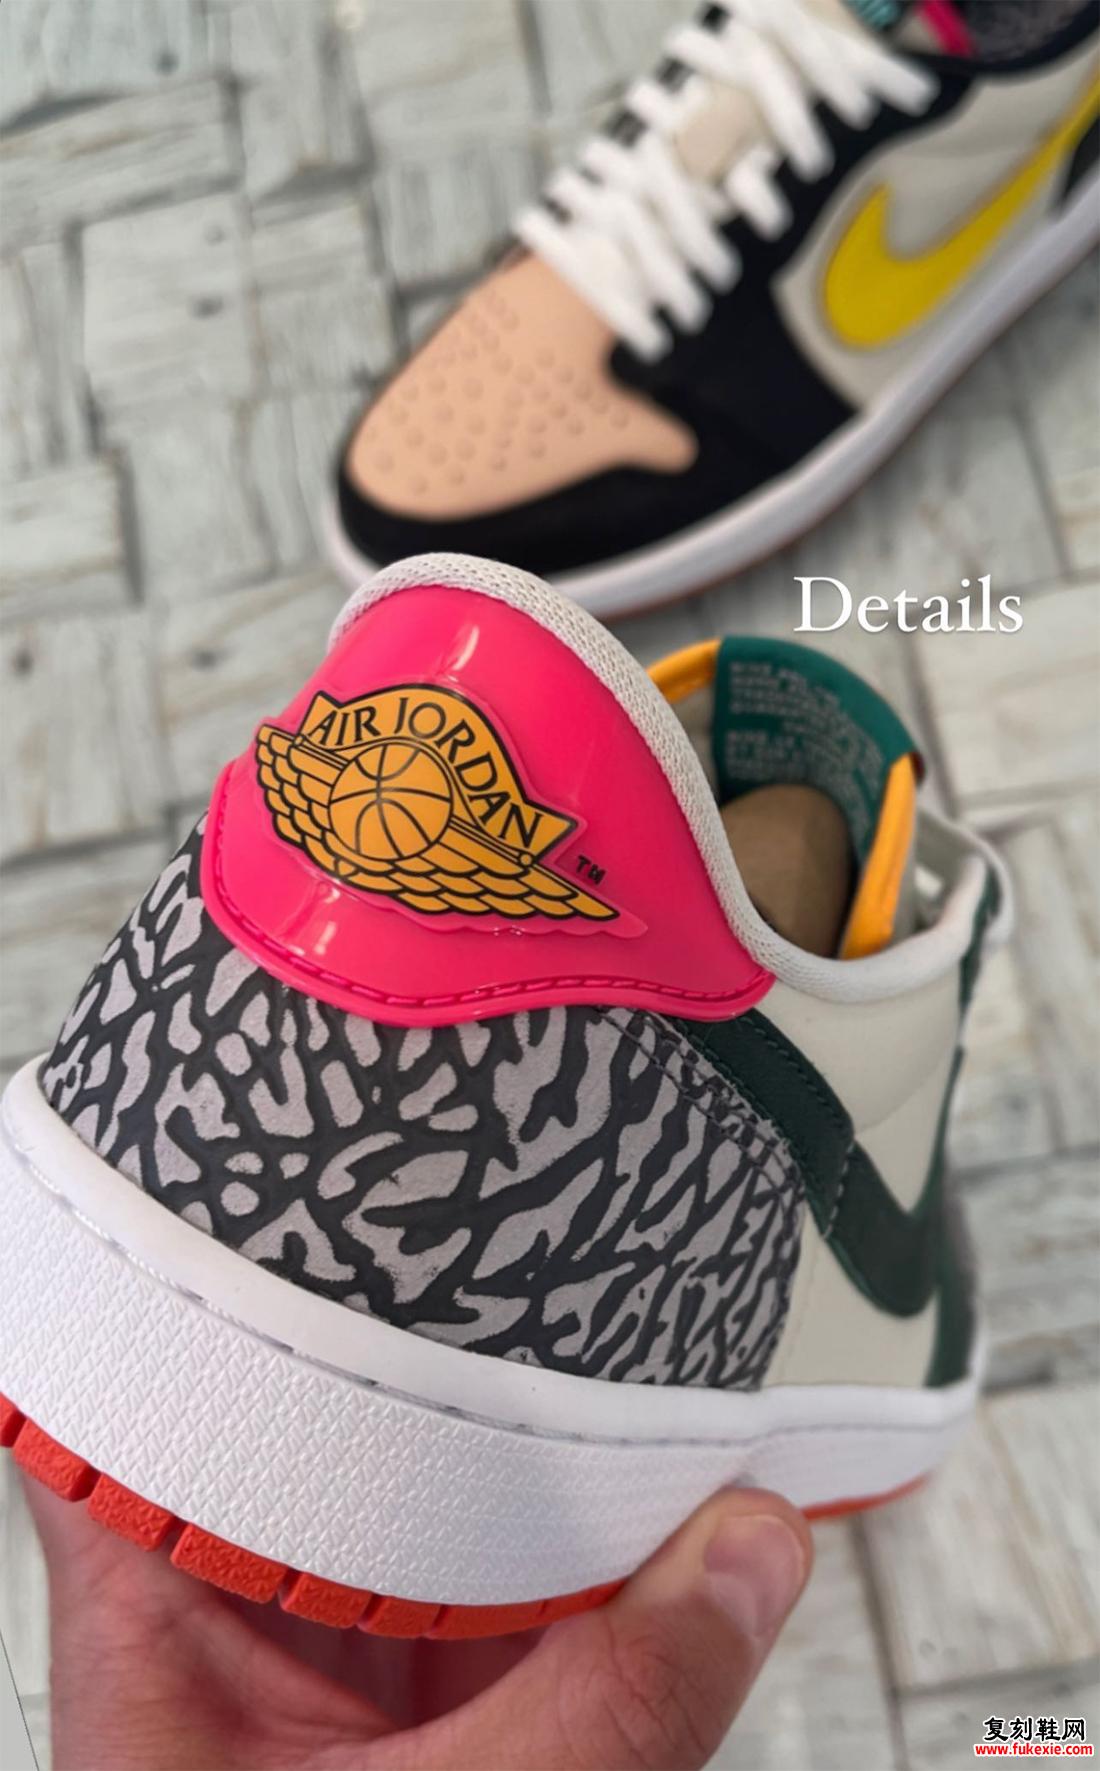 SOLEFLY X AIR JORDAN 1 LOW OG “WHAT THE” 正在开发中